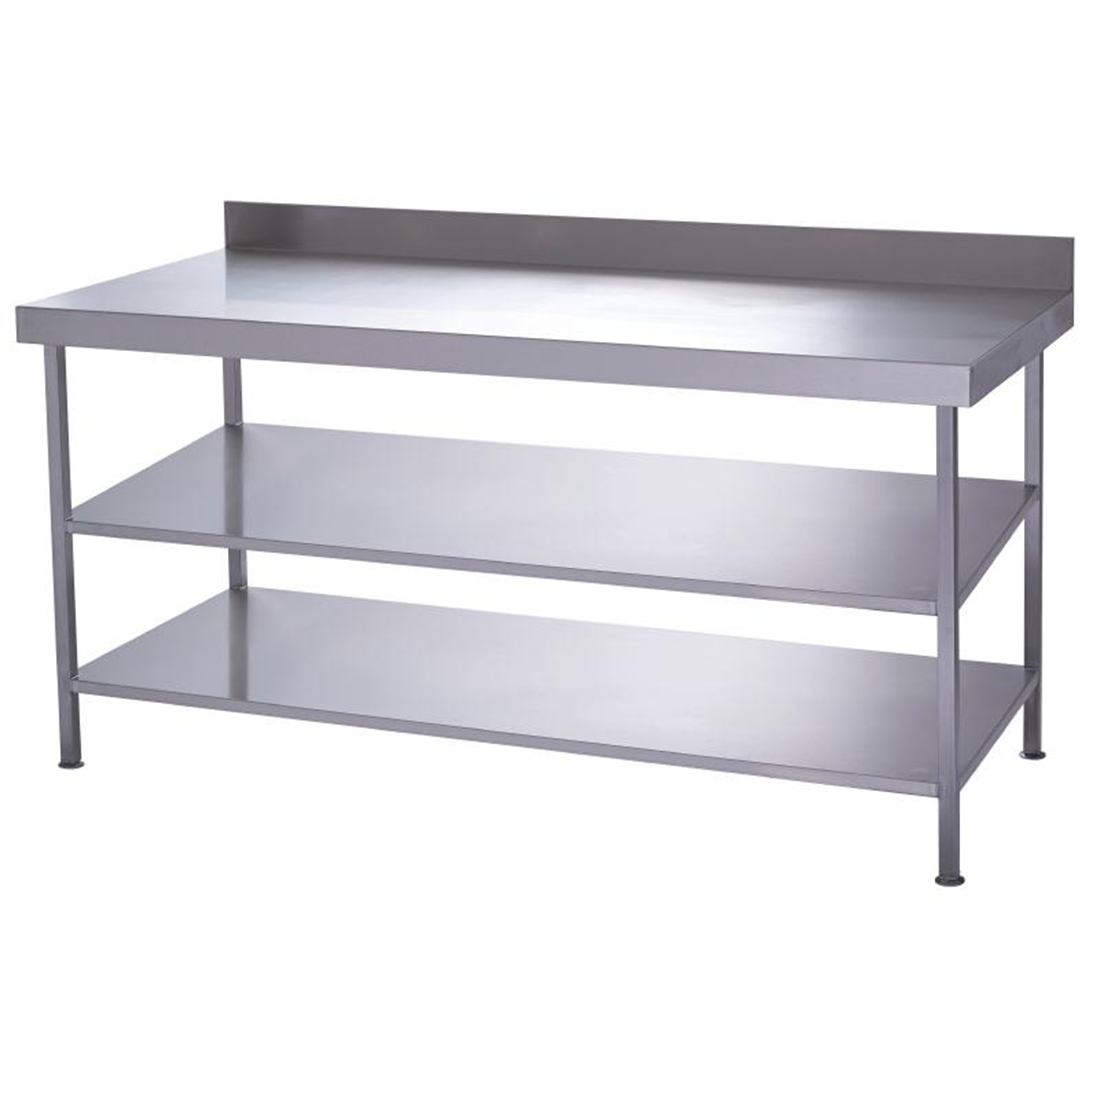 Parry Fully Welded Stainless Steel Wall Table 2 Undershelves 1200x600mm